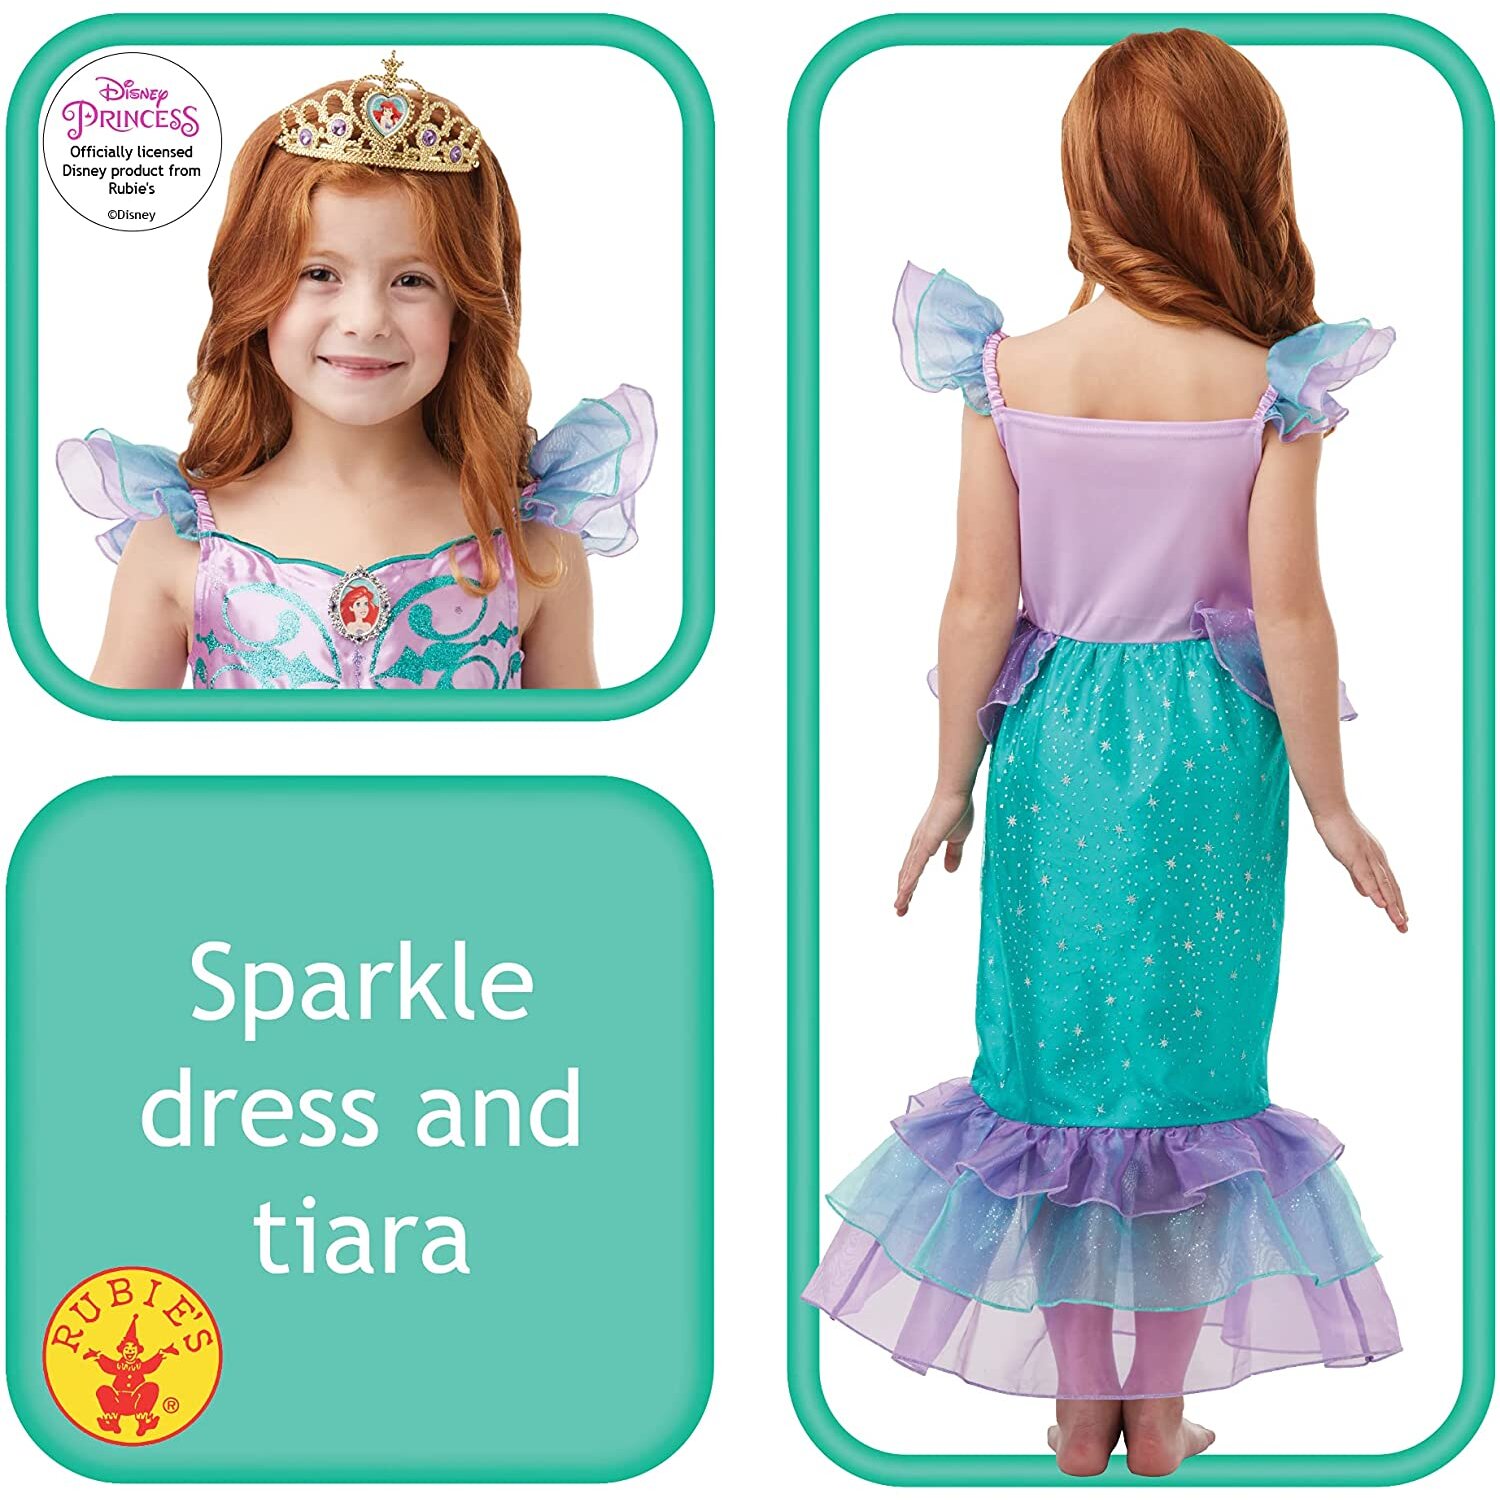 Rubie's Official Disney Princess Ariel Mermaid Glitter and Sparkle Girls Costume, Childs Size Medium Age 5-6 Years